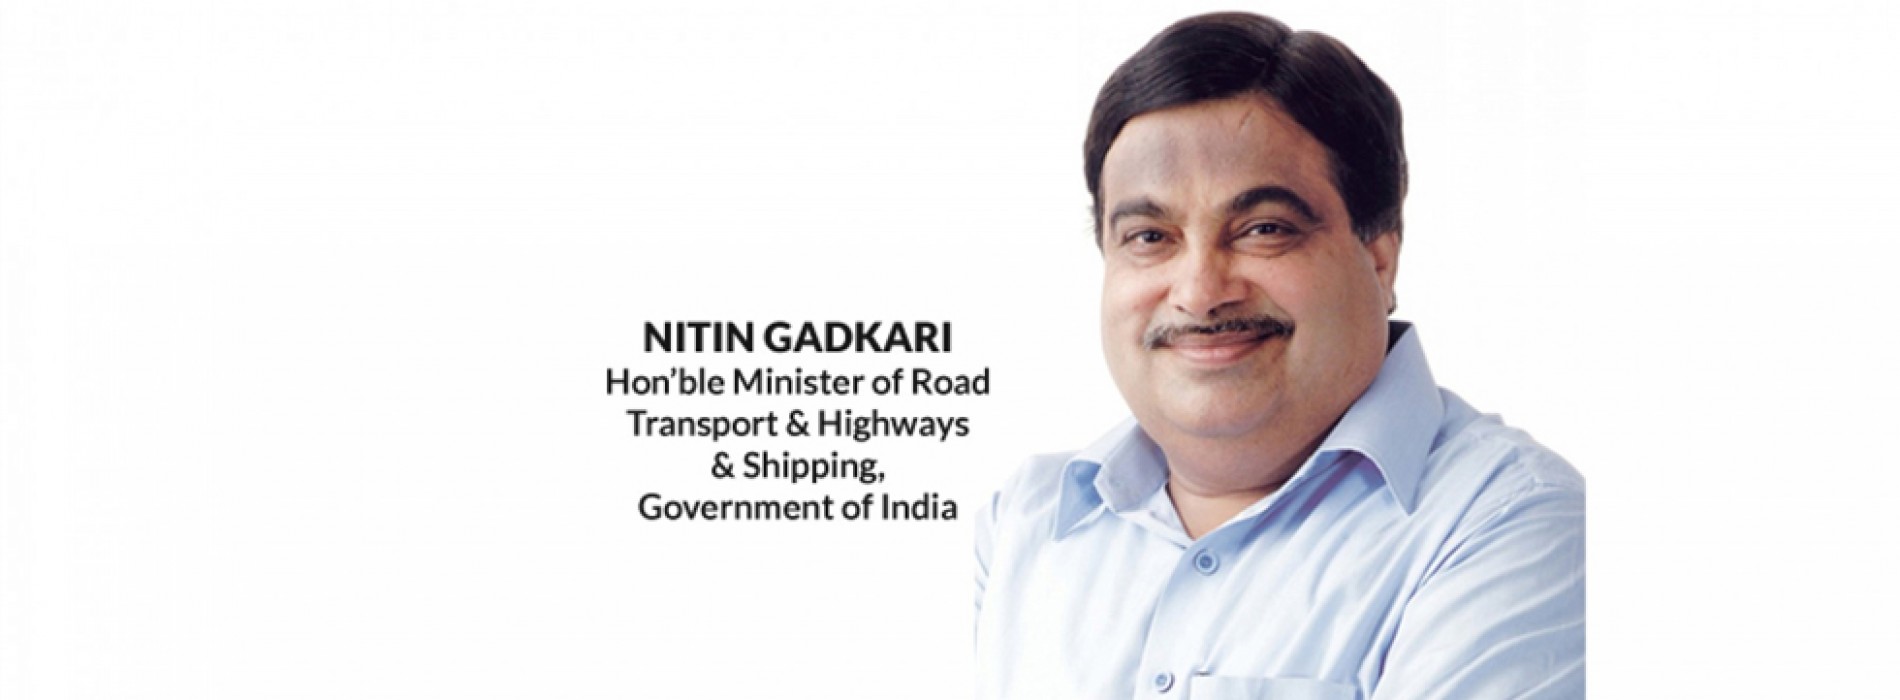 Govt plans to attract 40 lakh cruise tourists in 5 years says Nitin Gadkari